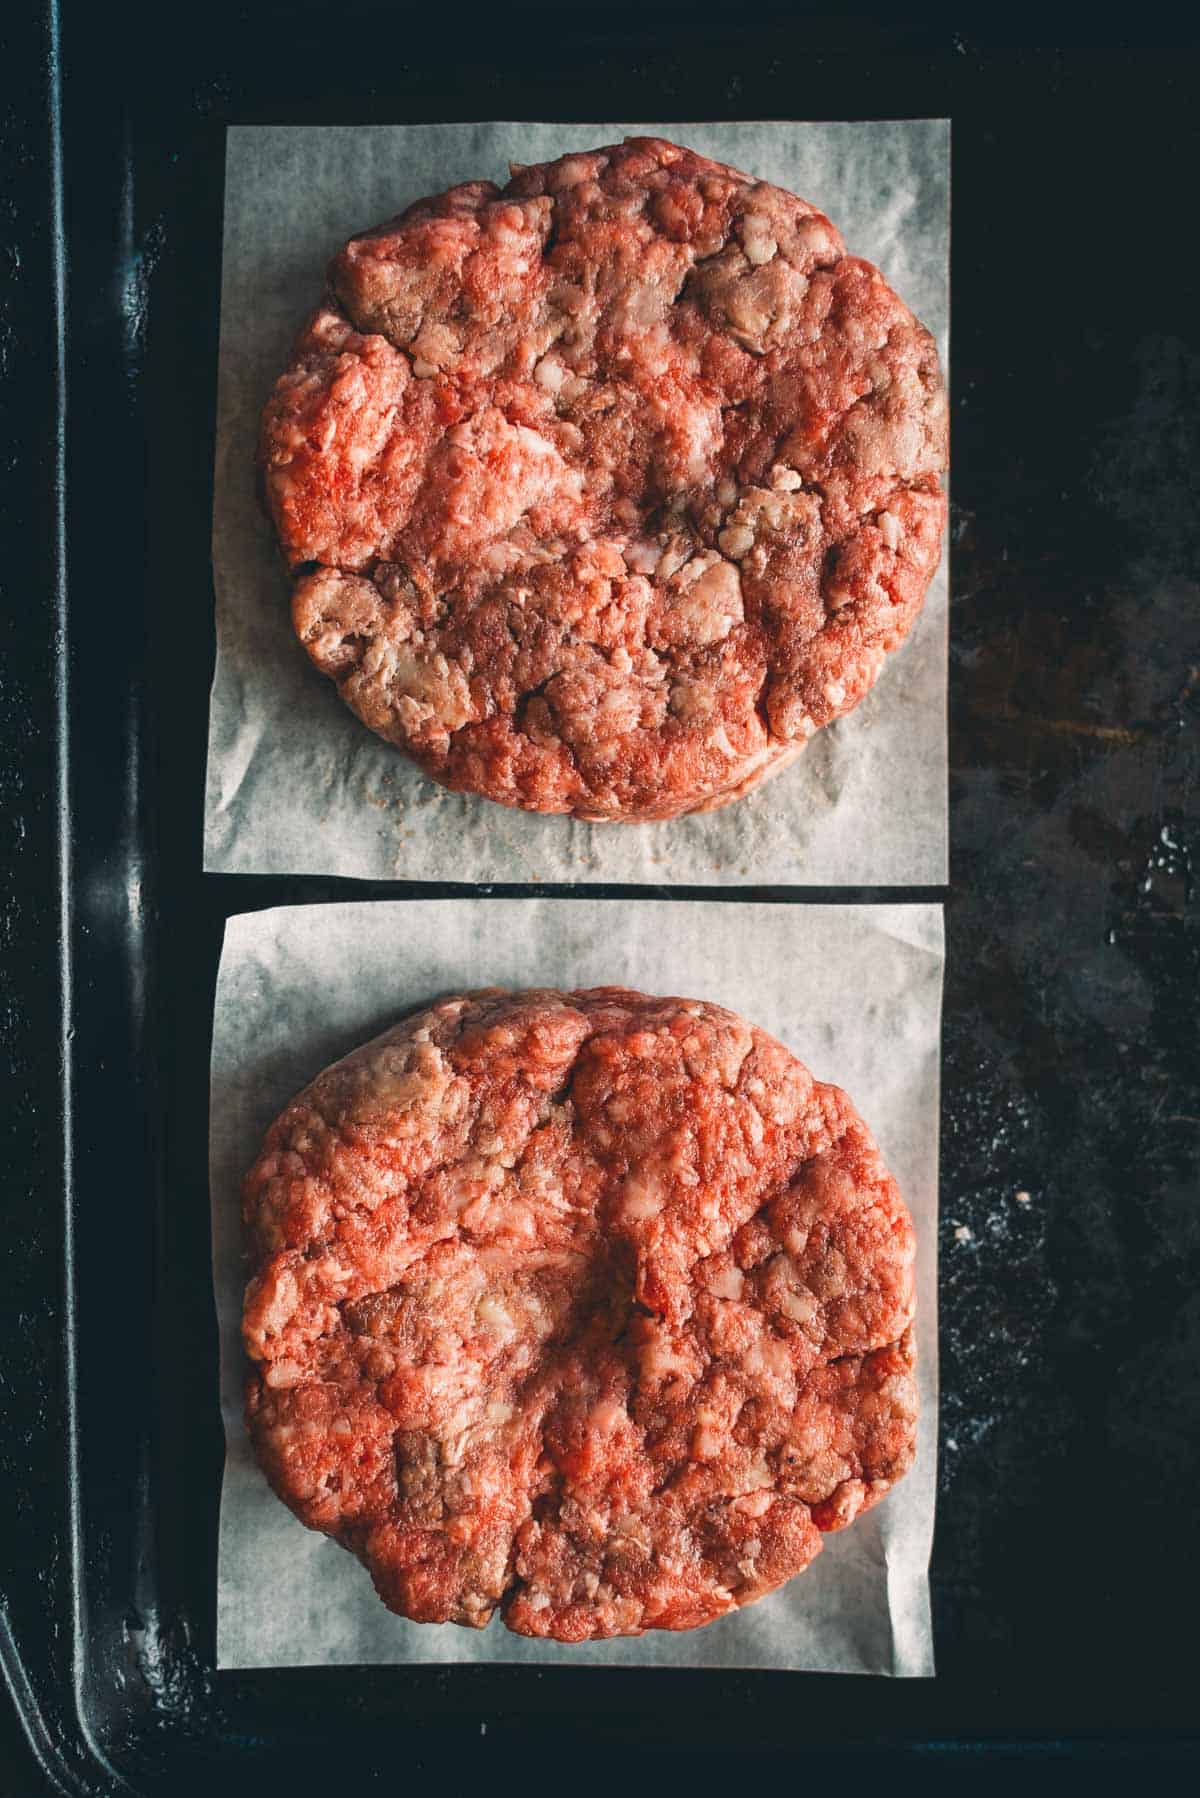 Two raw beef patties on parchment paper, placed on a dark baking tray with dimples in the center.